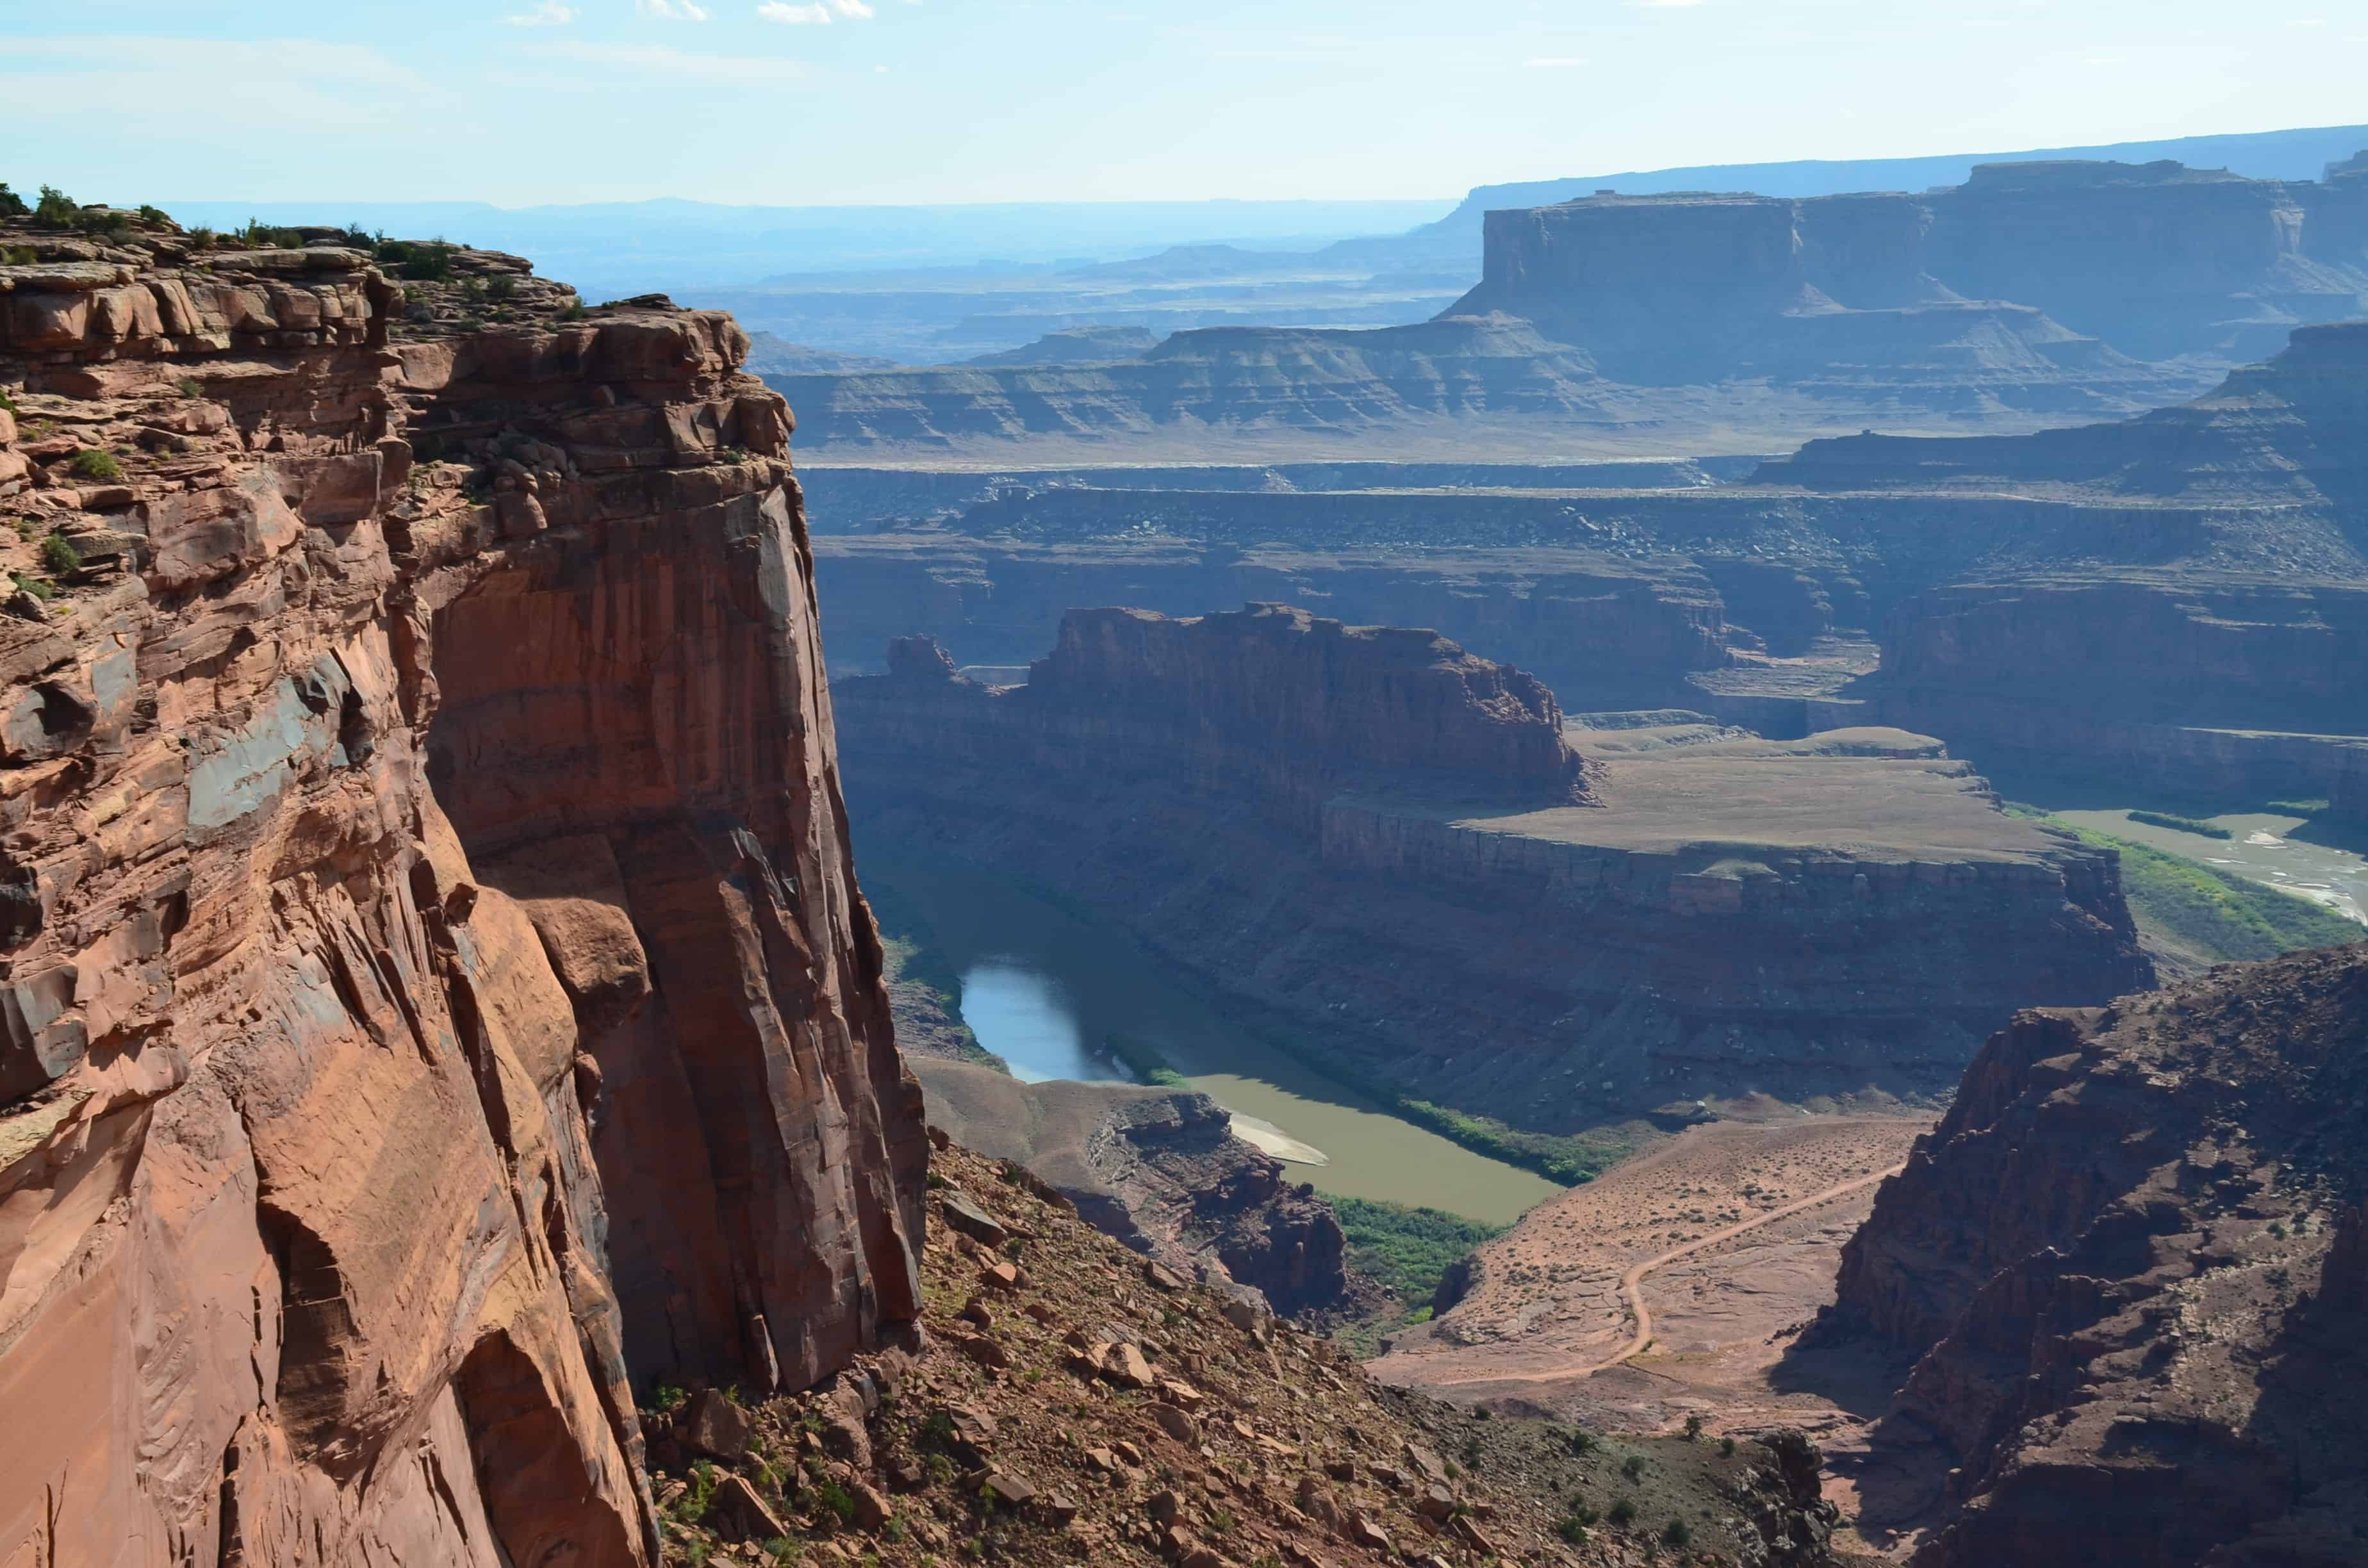 Meander Overlook at Dead Horse Point State Park in Utah